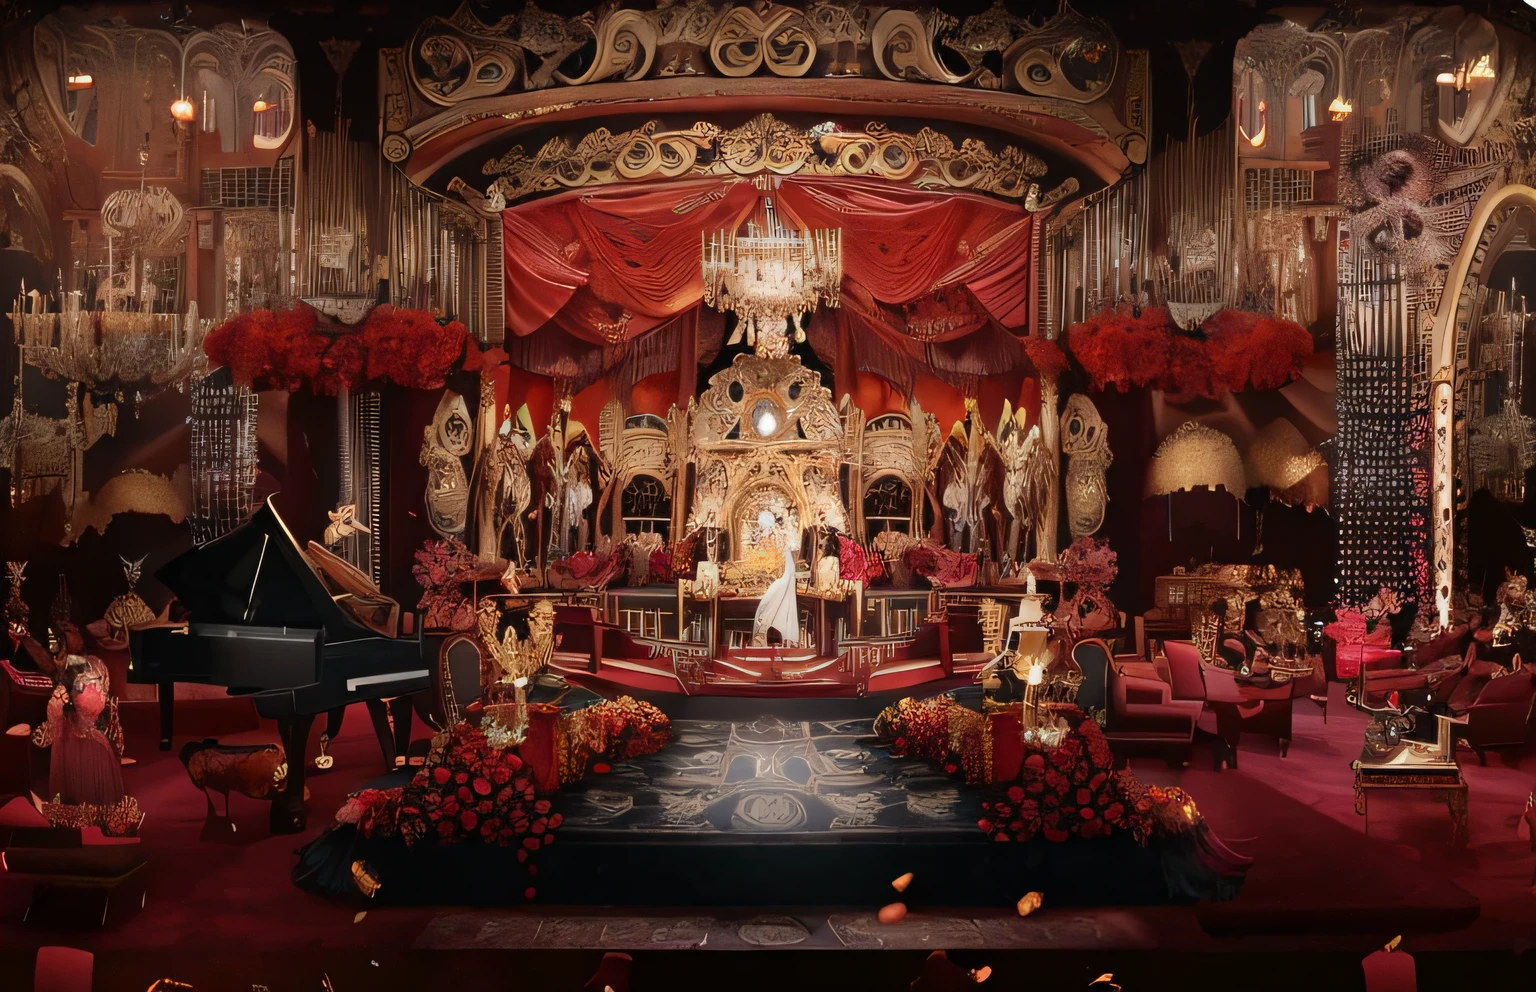 Close-up of the piano and the stage of the lion, exquisitely designed throne room, luxurious wedding, detailed set design, Gorgeous and complex background, elaborate stage effects, ornate backdrop, Throne Room, palatial scene, royal interior, stunning arcanum backdrop, lavishly decorated, rendering of beauty pageant, Luxurious Rococo Baroque setting，European Wedding